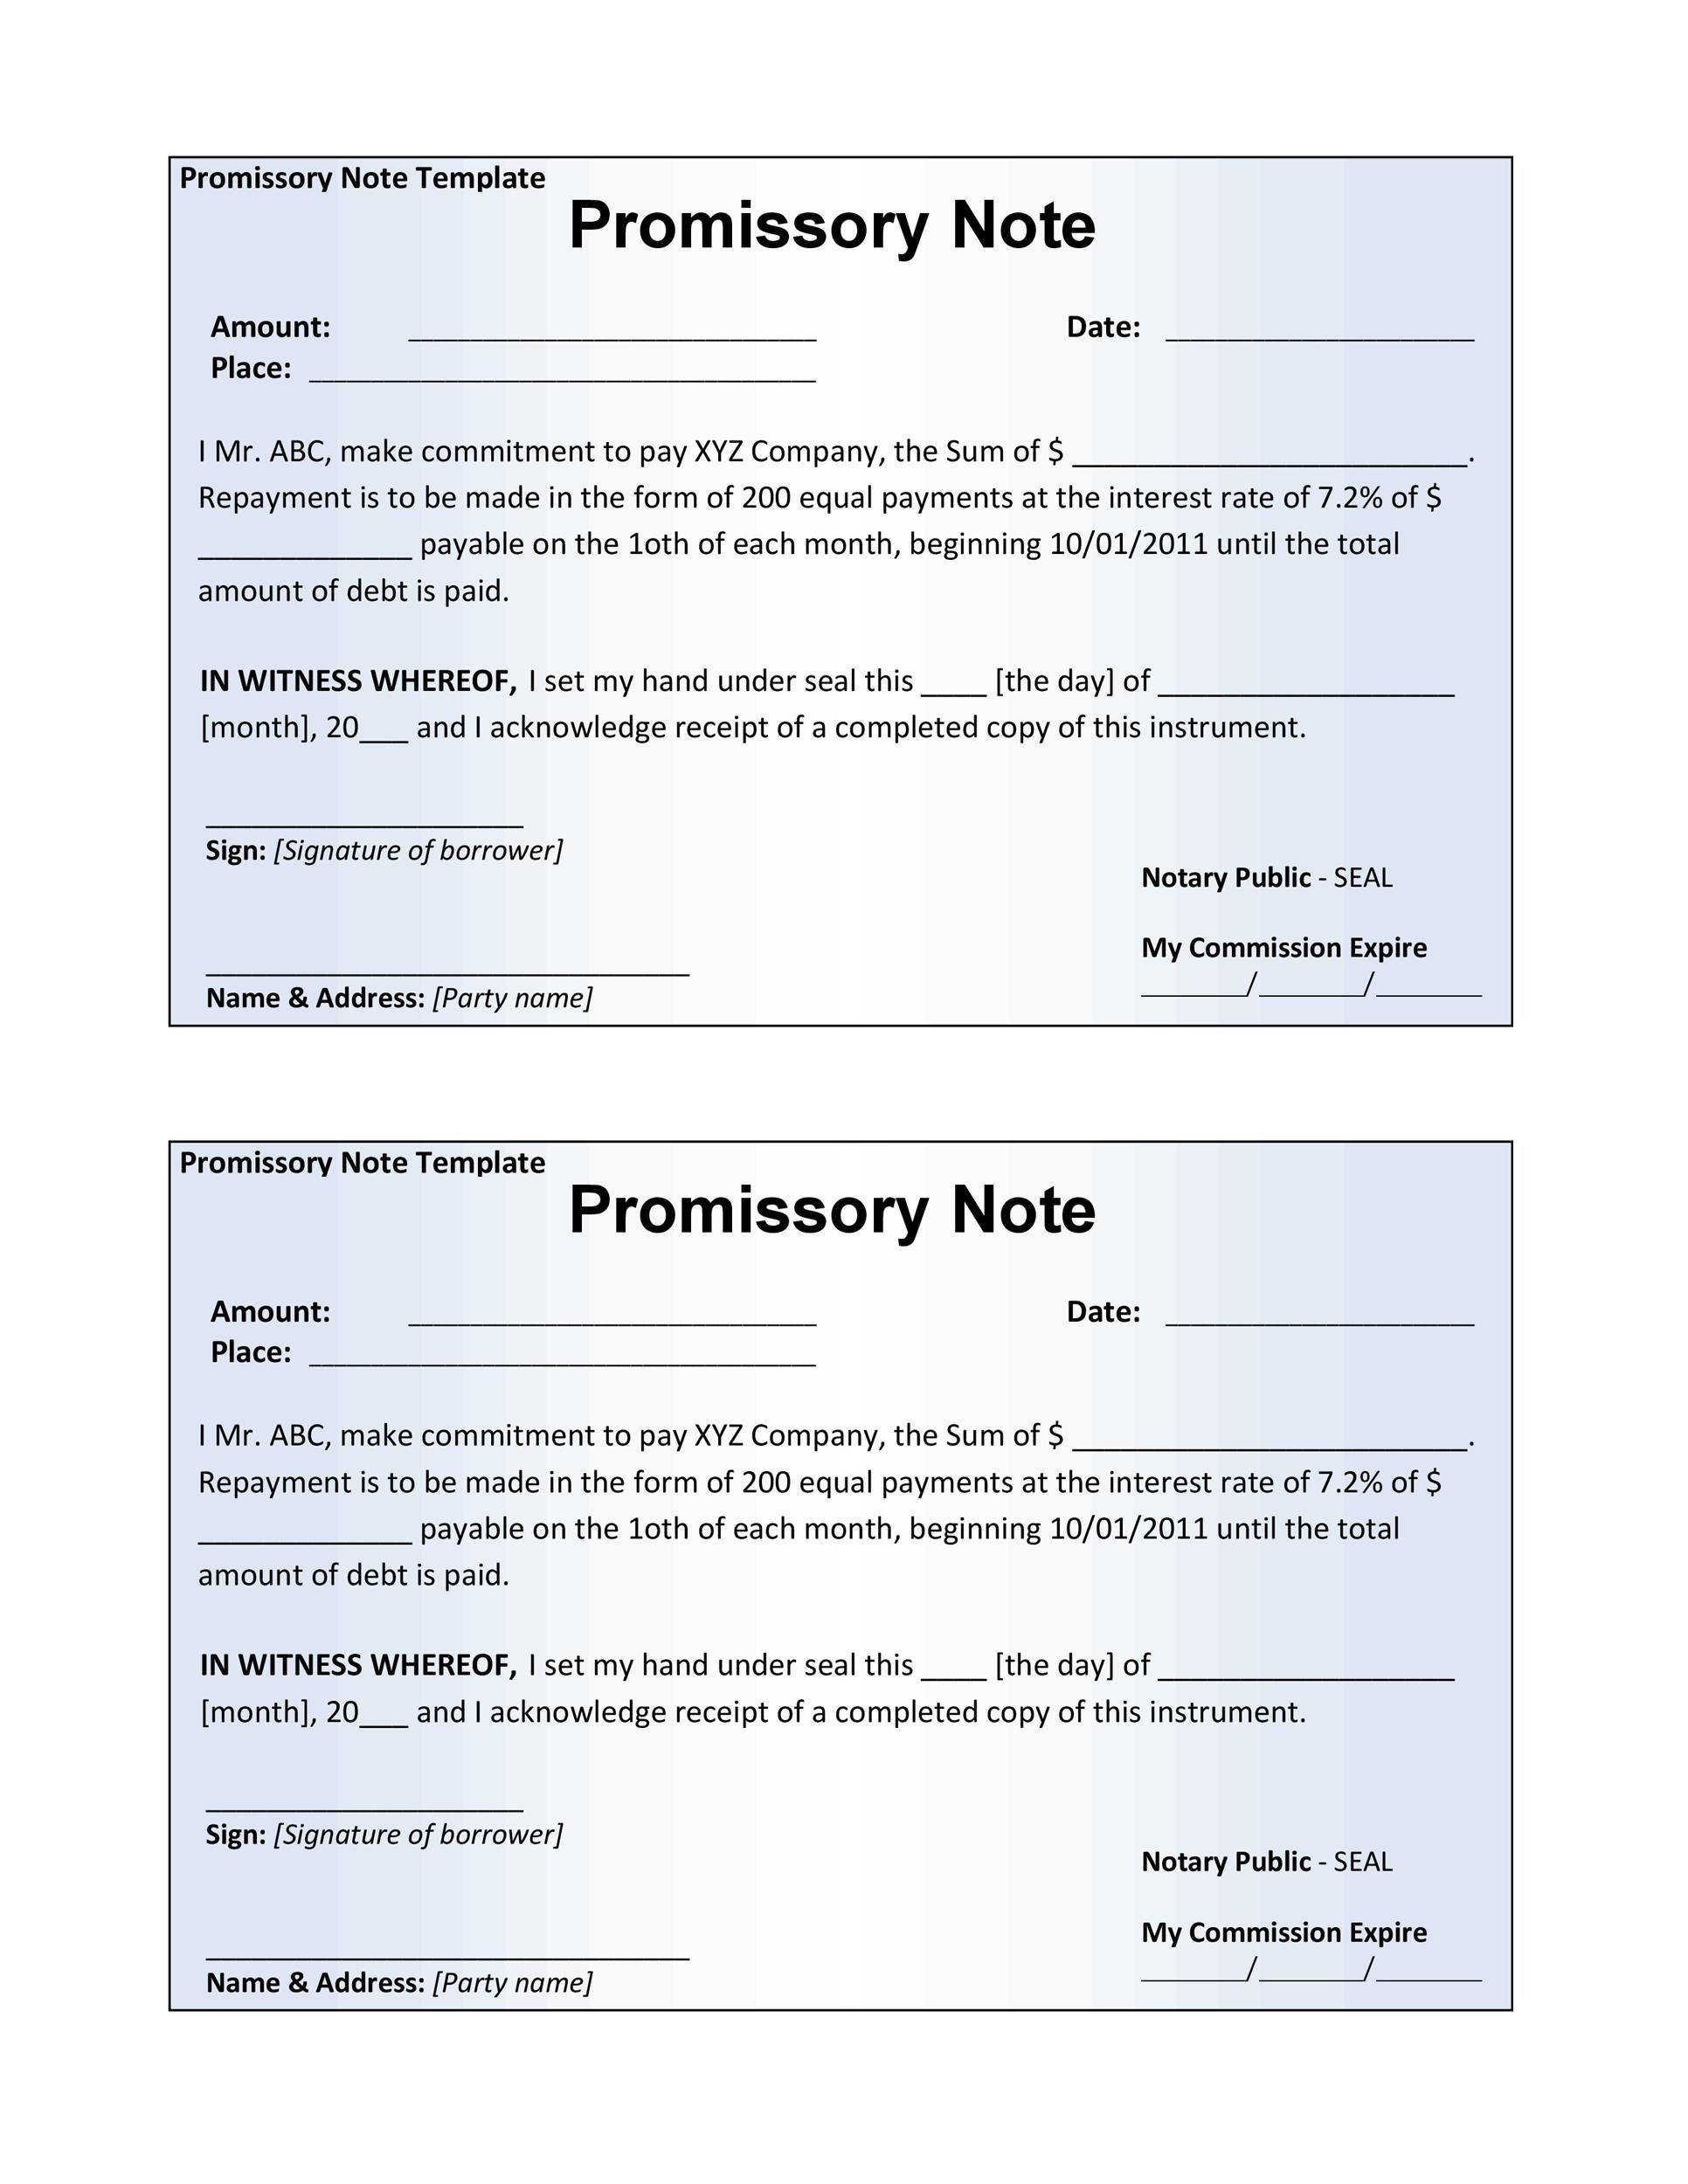 promissory-note-sample-template-notes-template-business-letter-gambaran